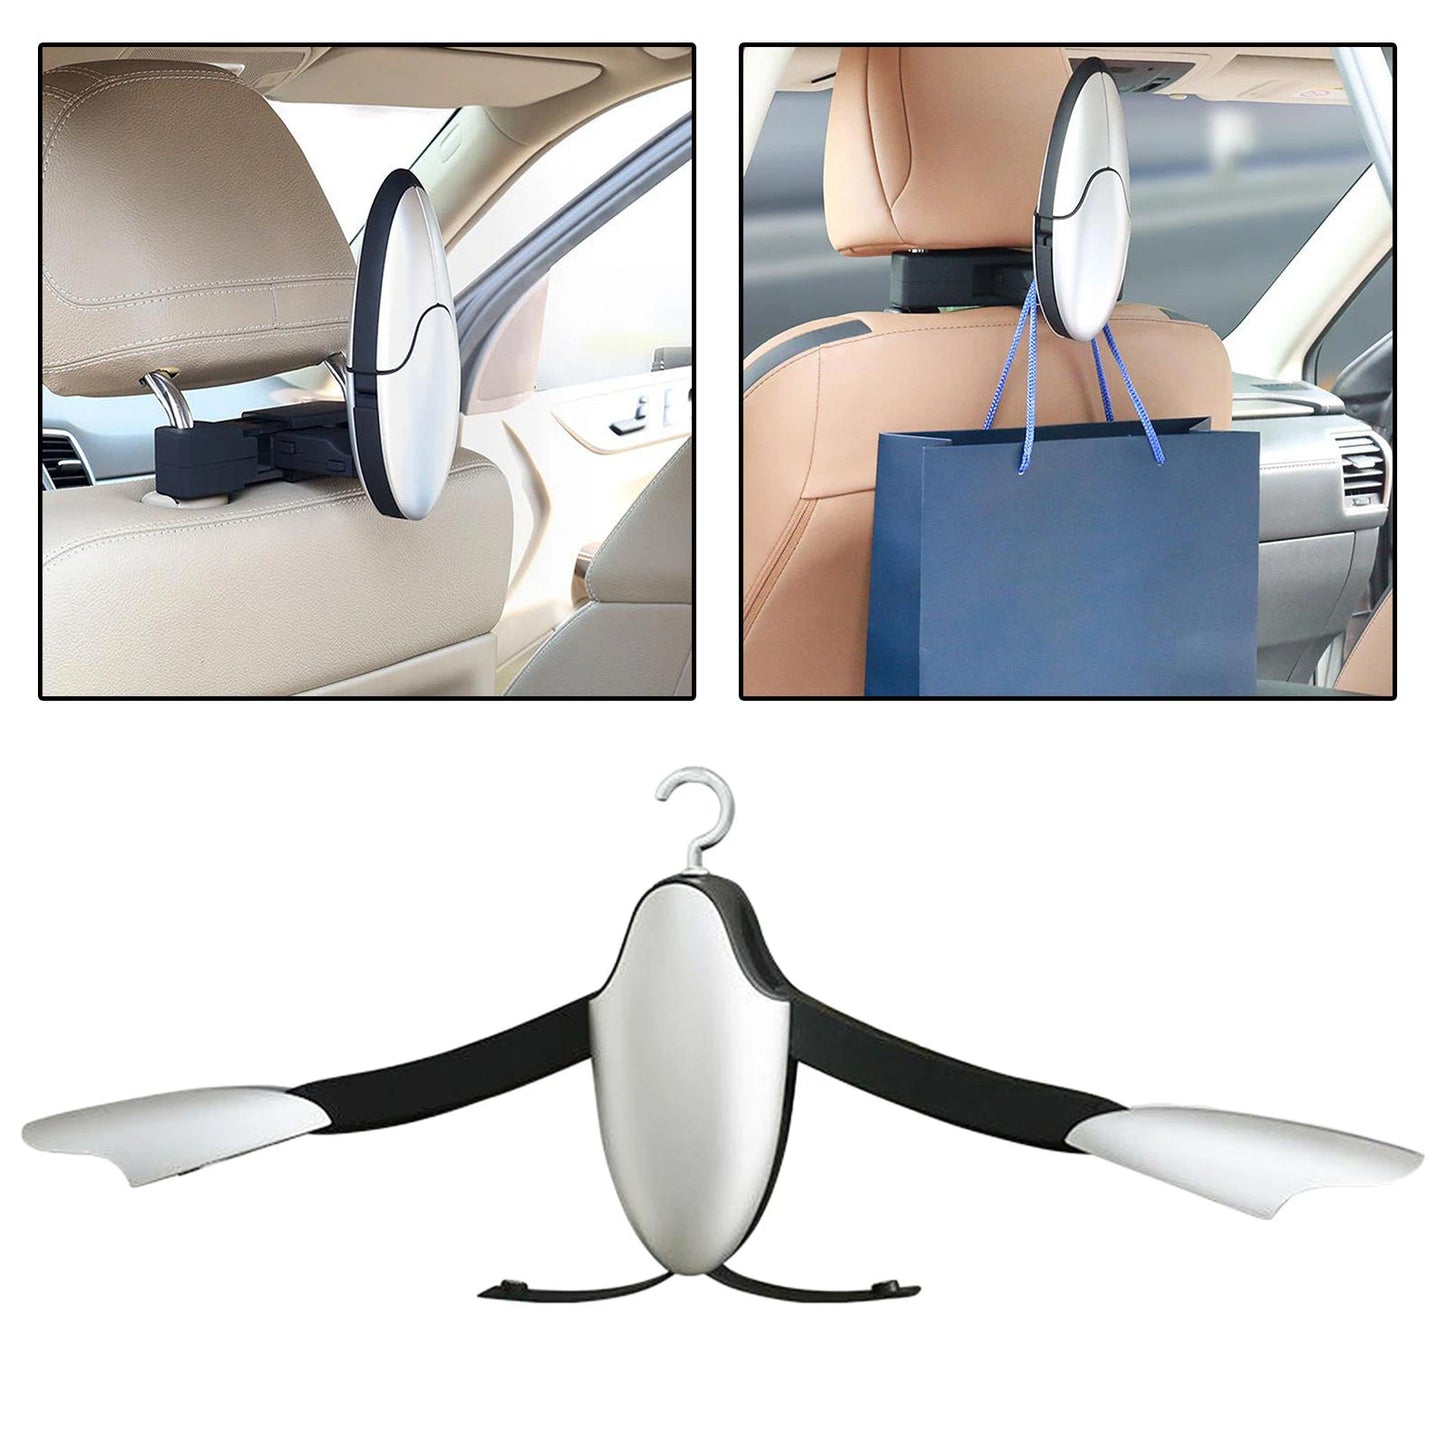 Oshotto CH-05 Multifunctional Foldable ABS Headrest Car Coat Hanger for Suit Coats Blazer Jackets